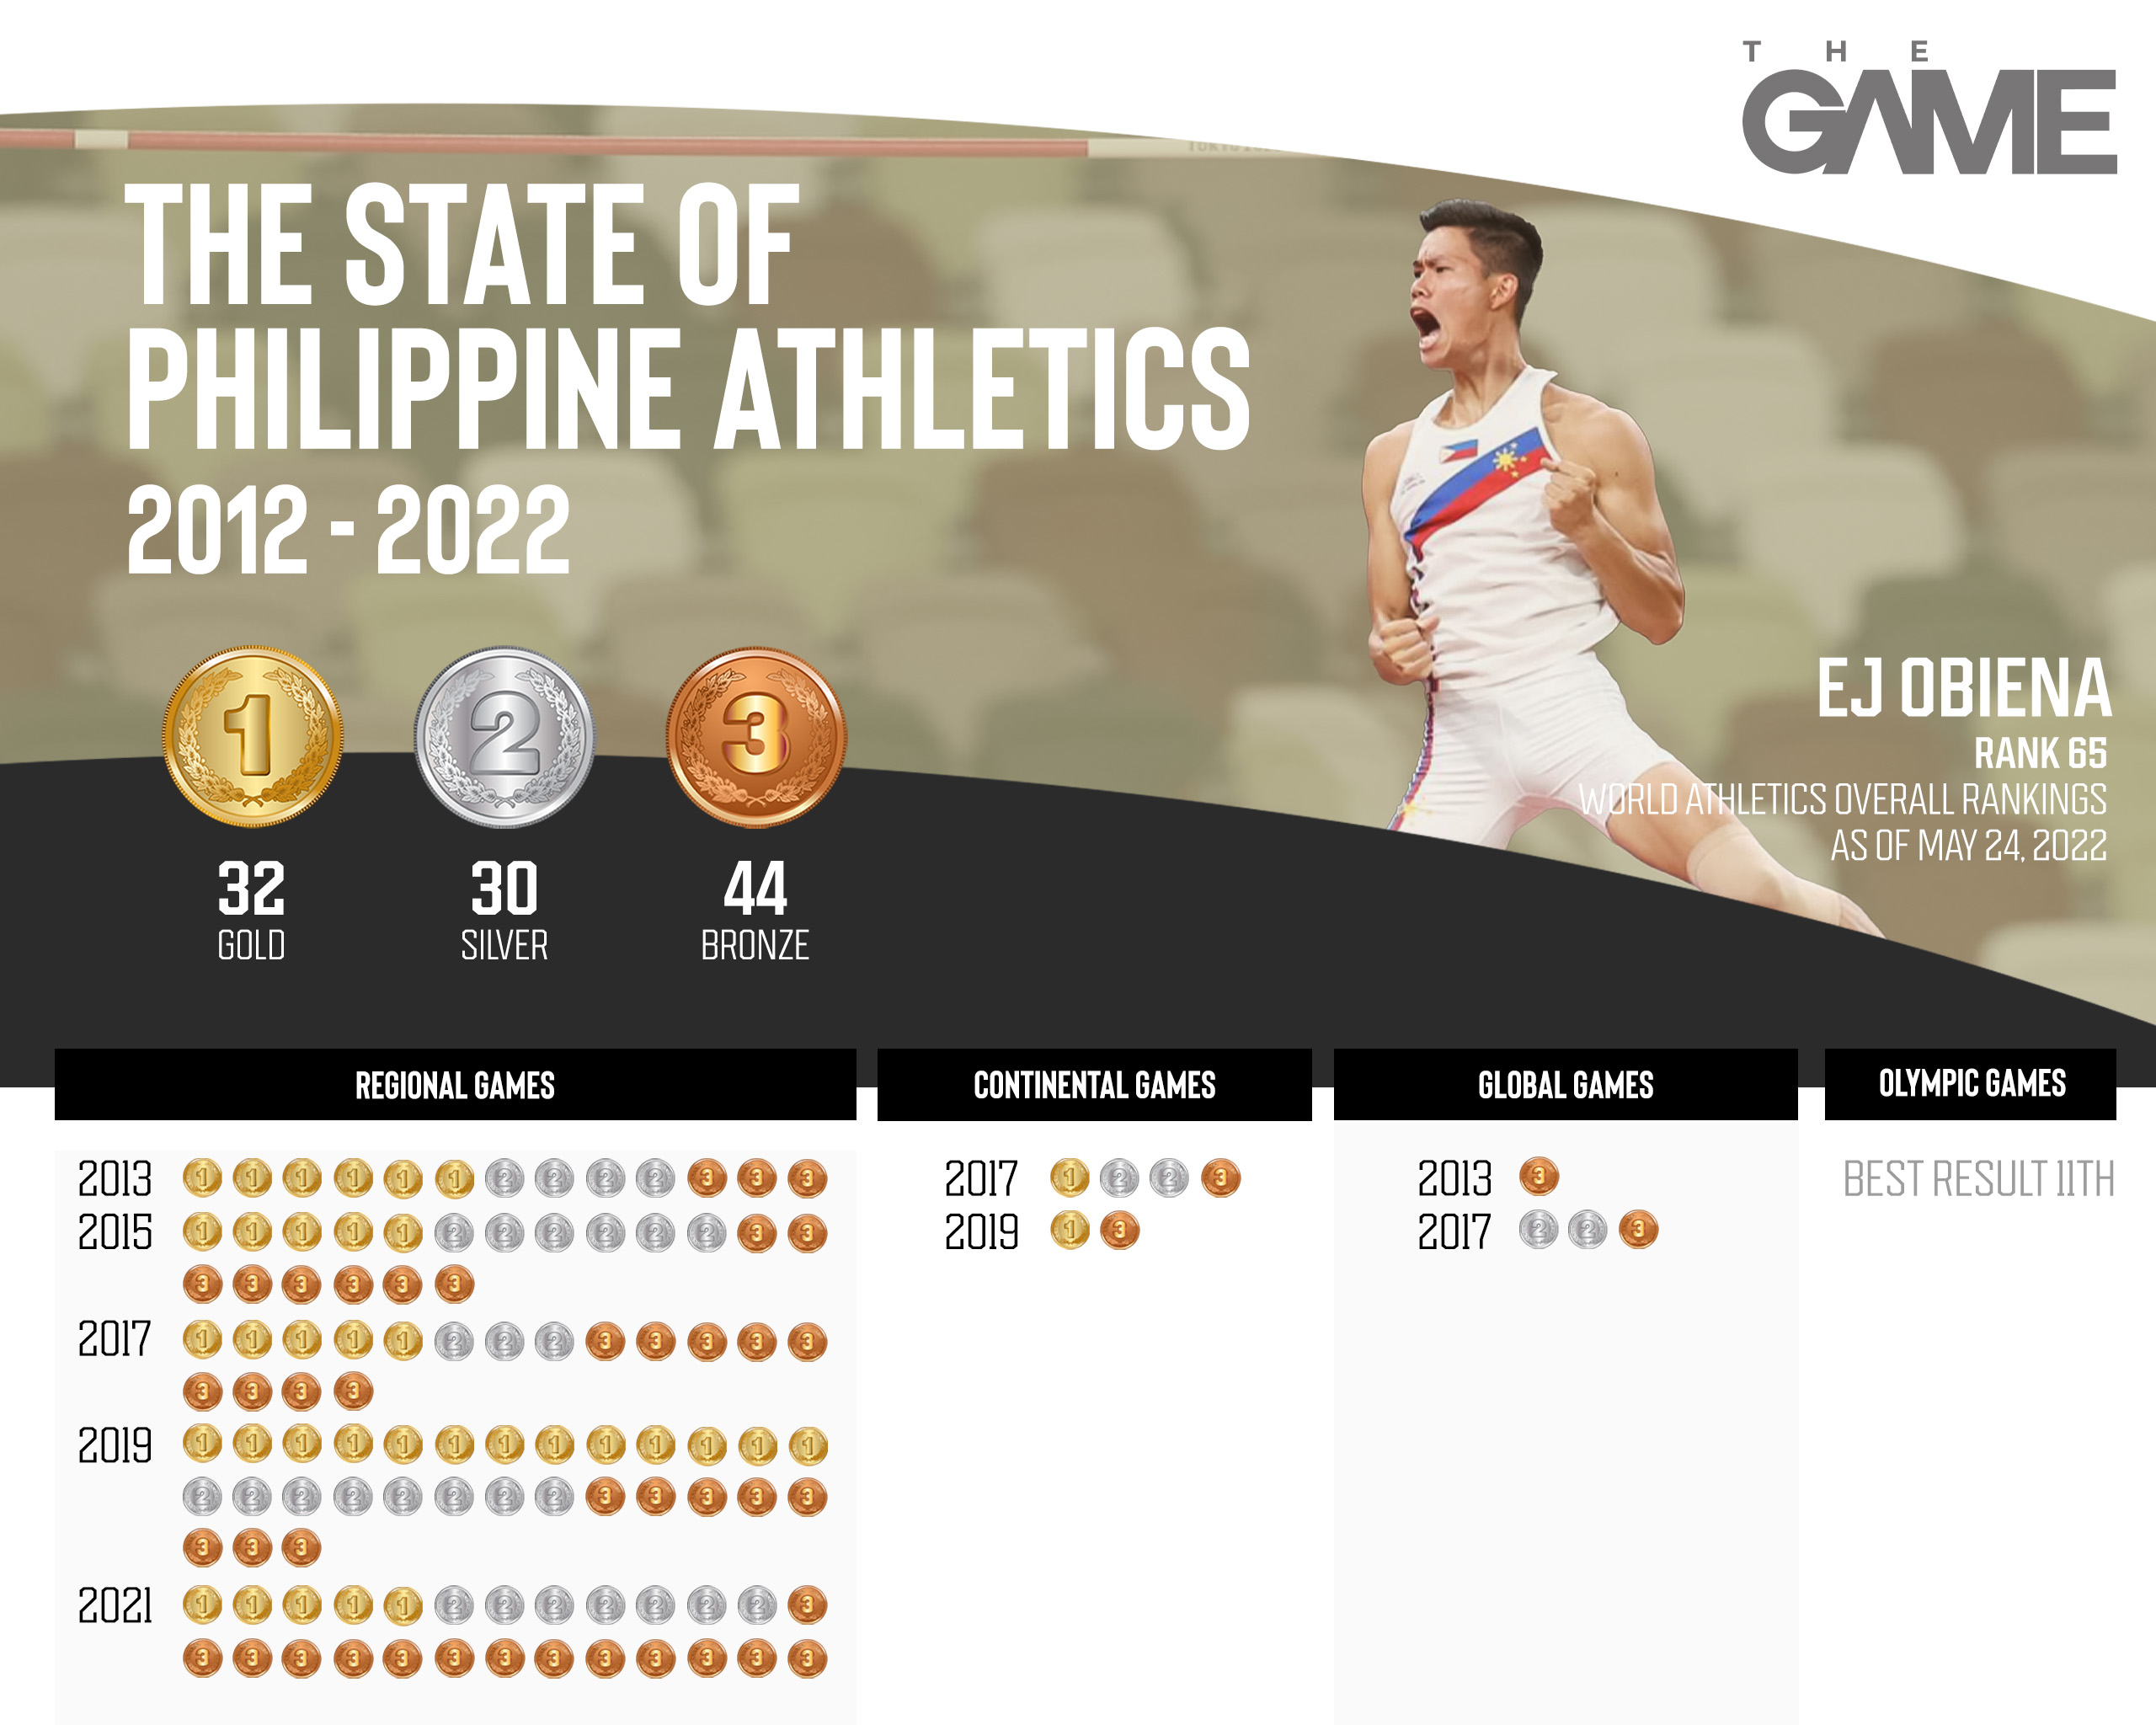 The Philippines' athletics medals from 2012 to 2022.